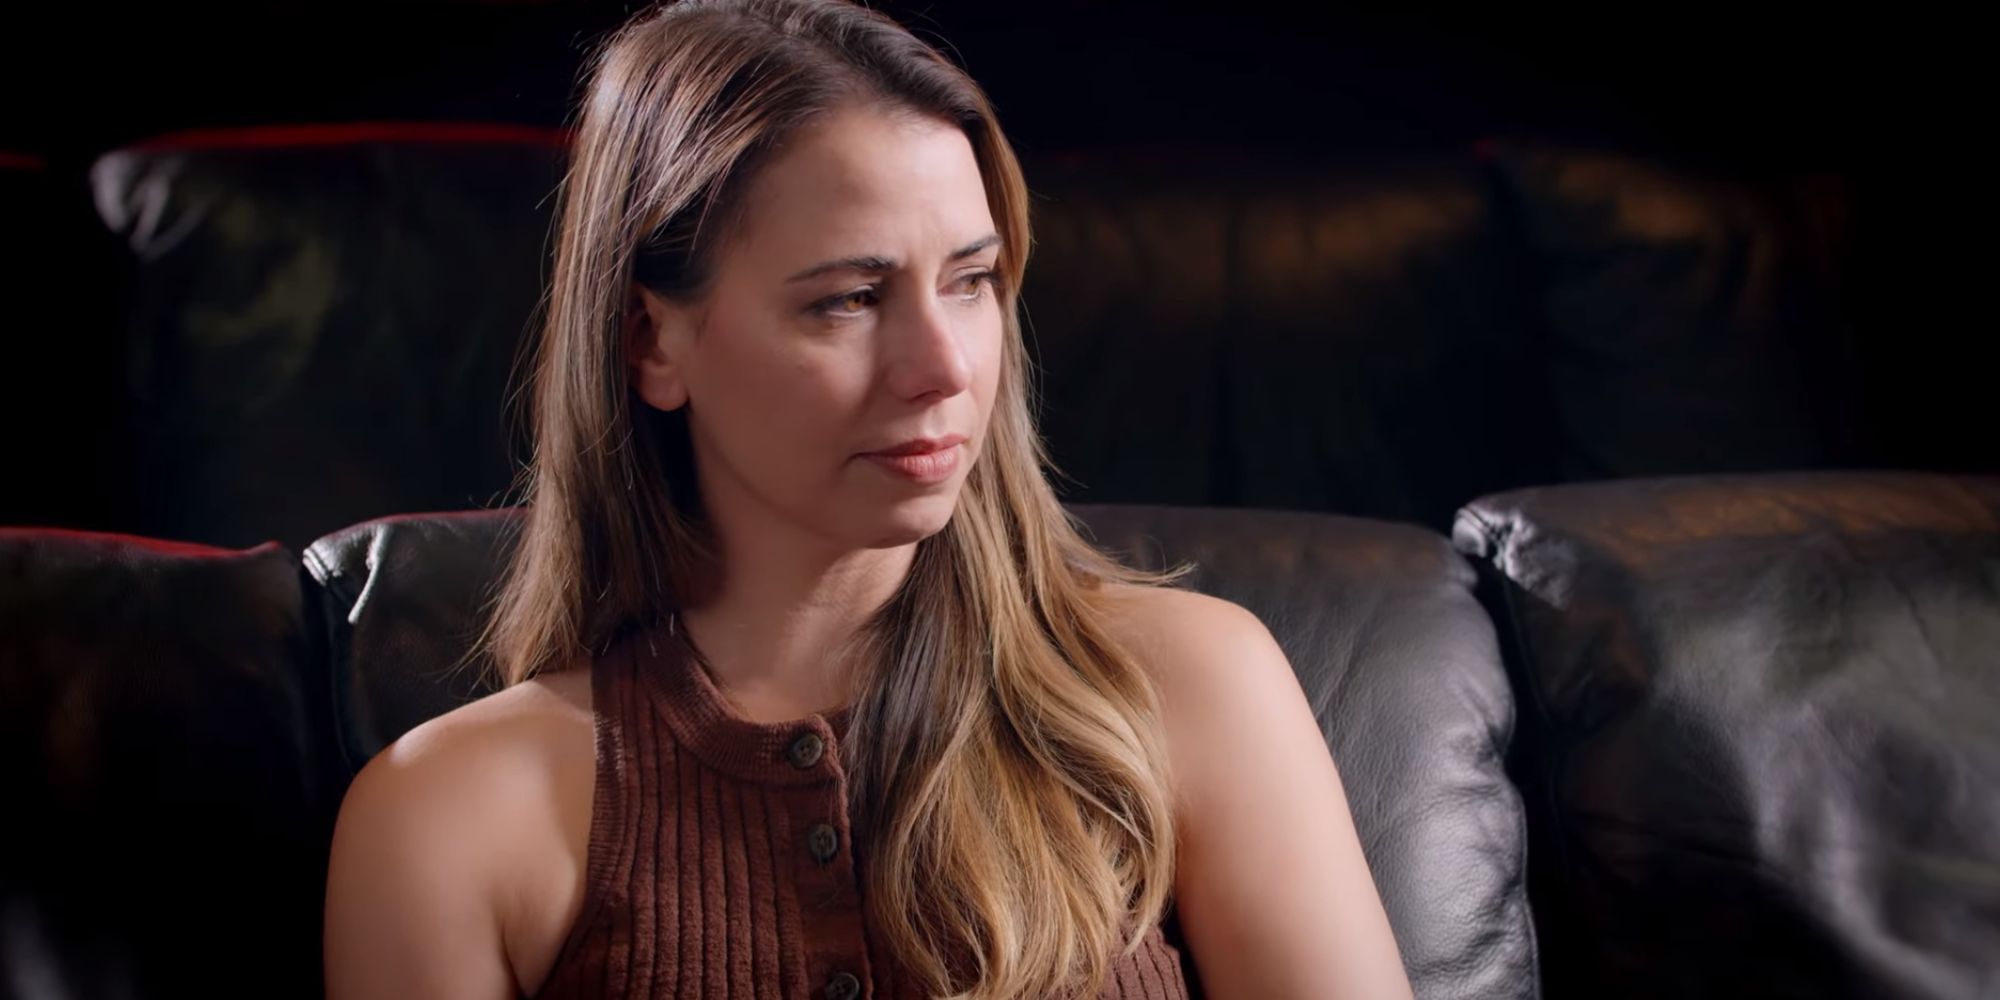 Actor Laura Bailey bring interviewed as part of a documentary on The Last of Us Part 2